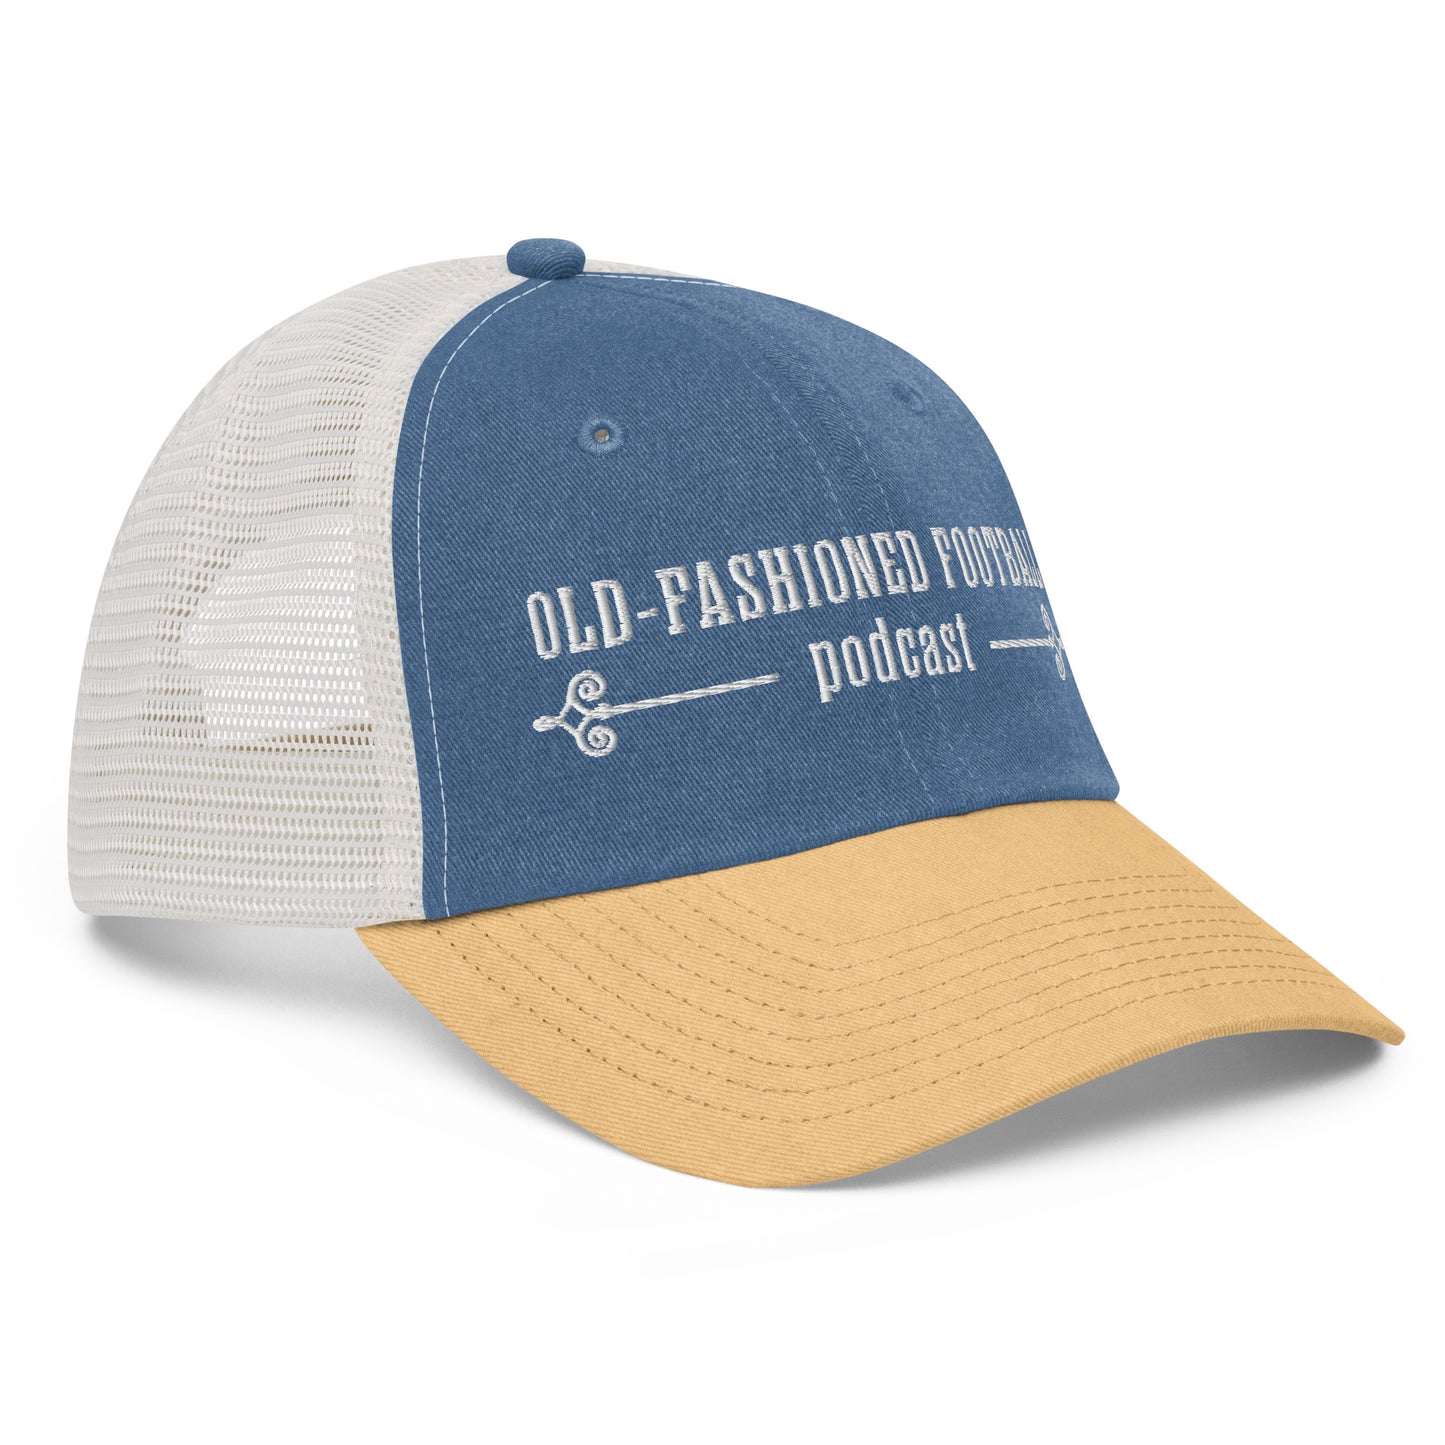 Old-Fashioned Football Podcast - Pigment-dyed cap